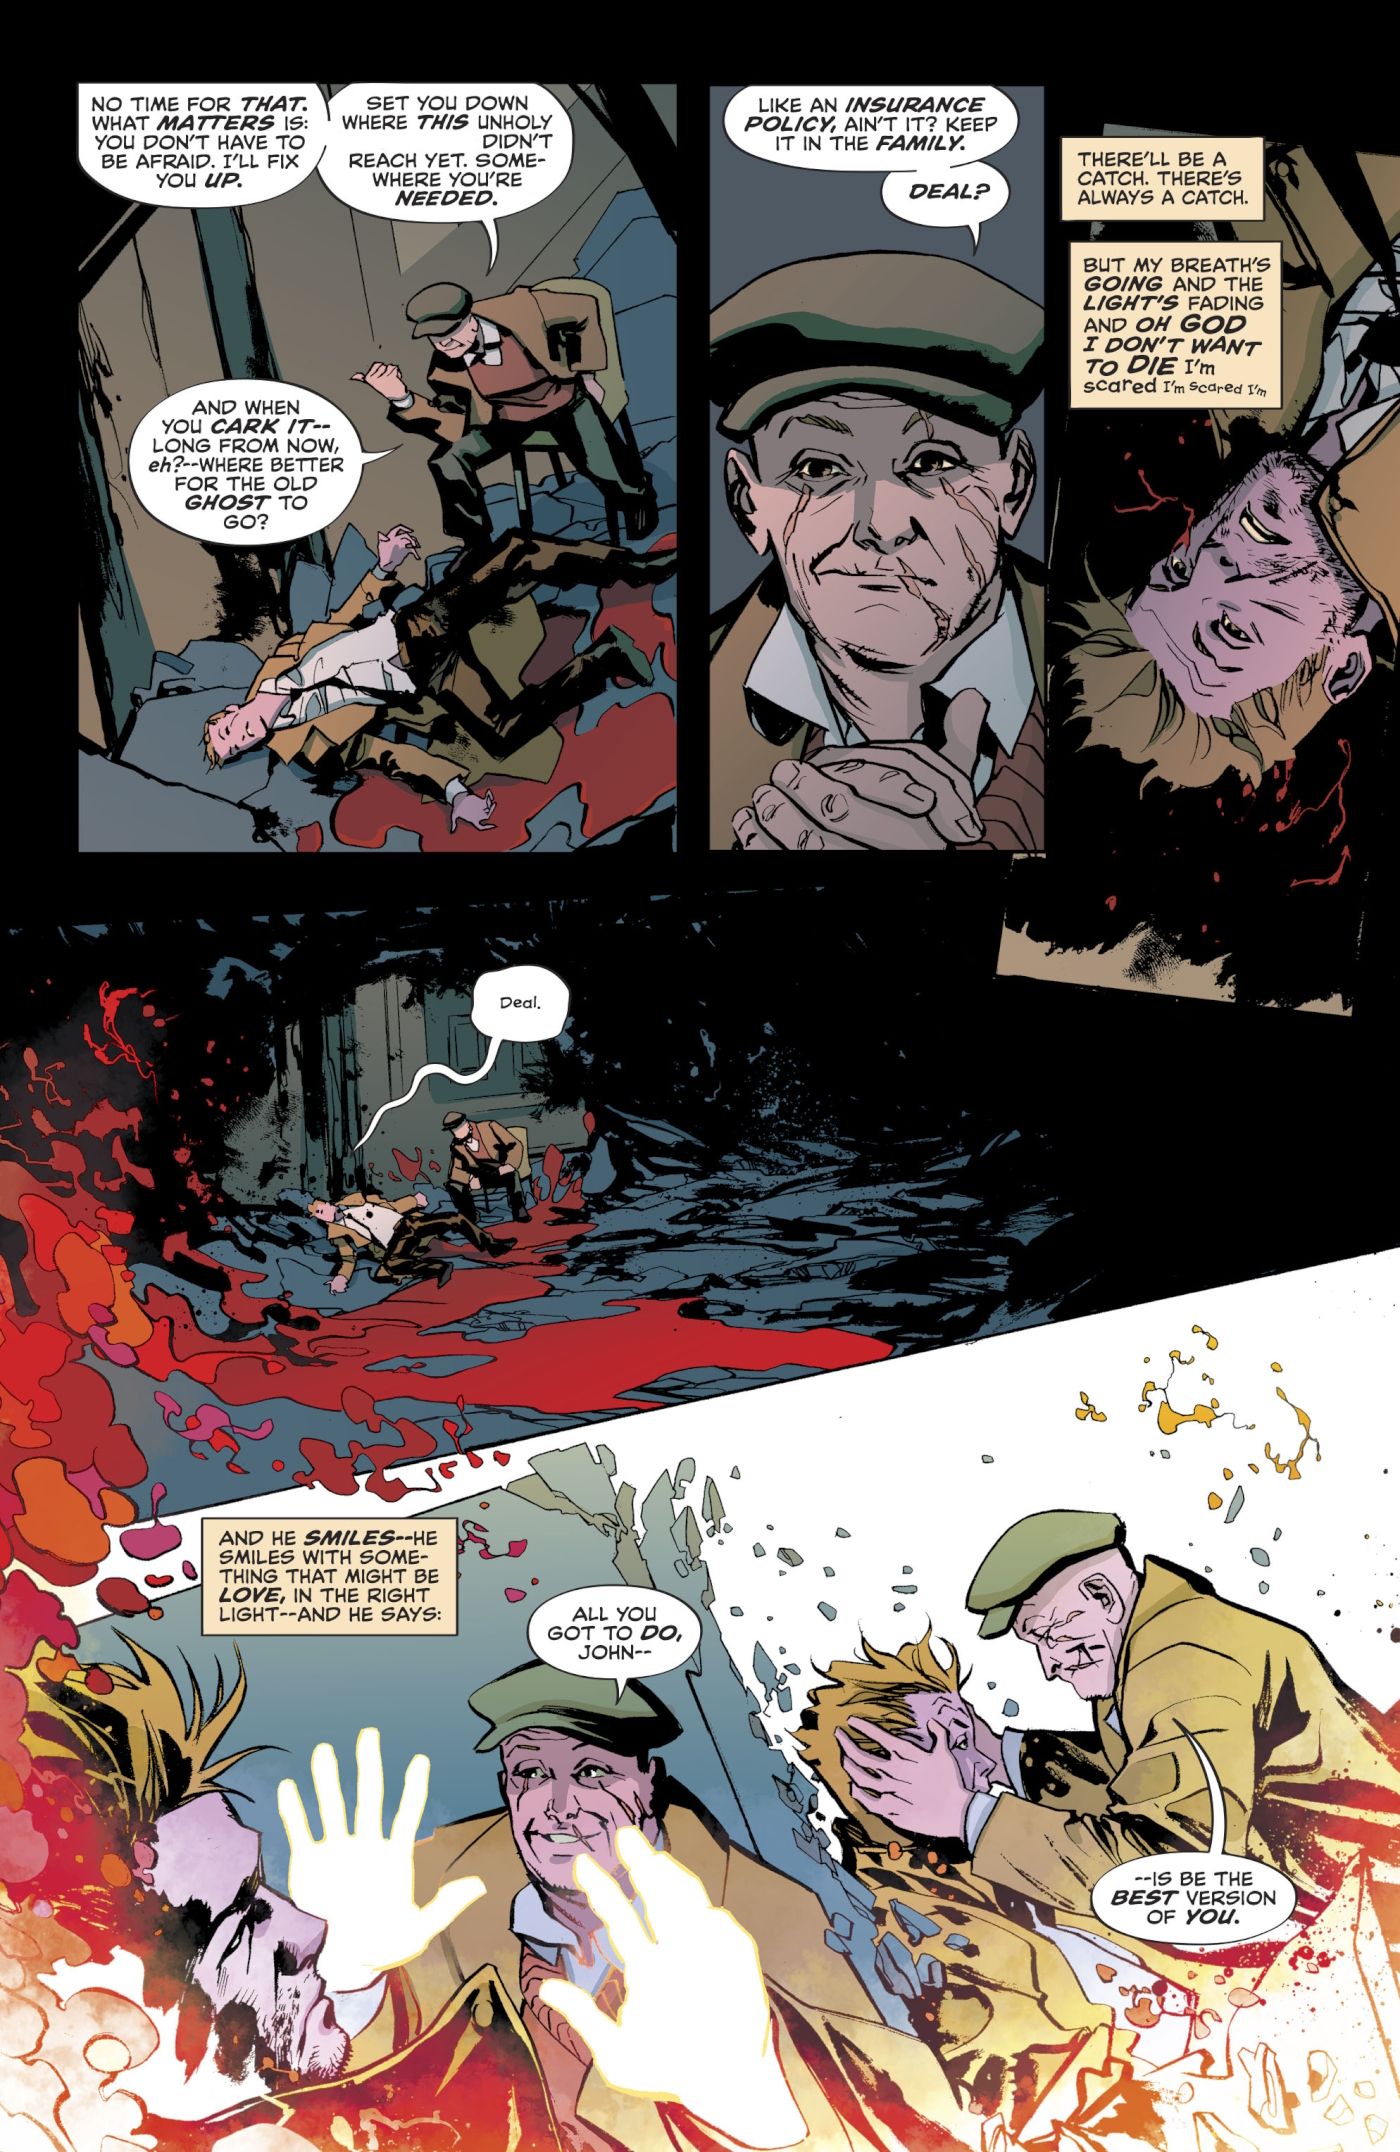 John Constantine Makes A Deal With Himself